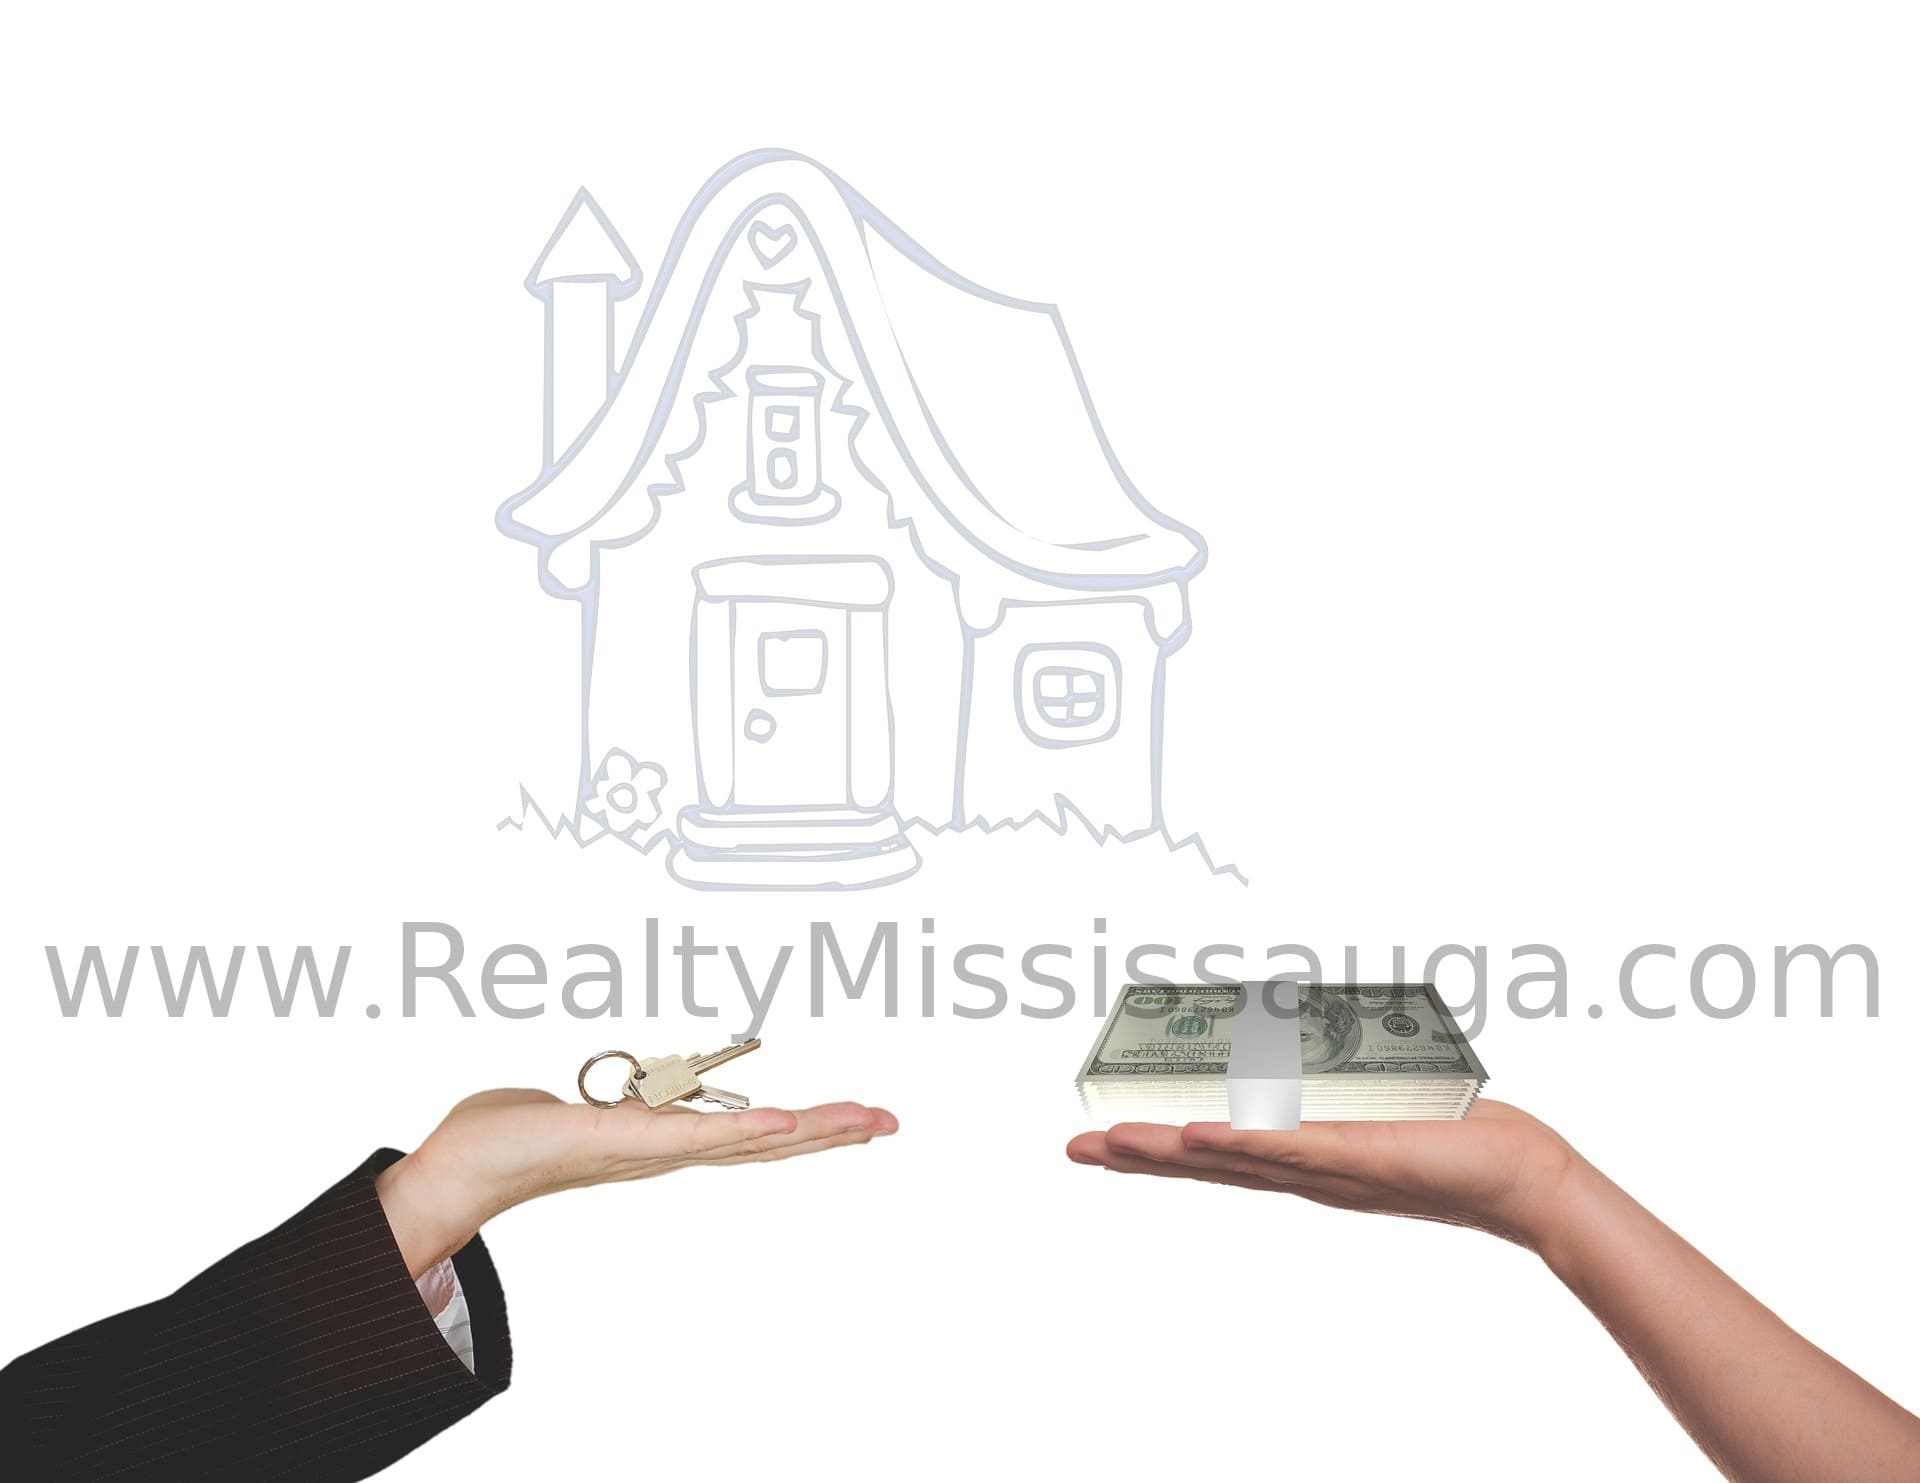 Listing Properties for sale, lease, and Rent in Mississauga